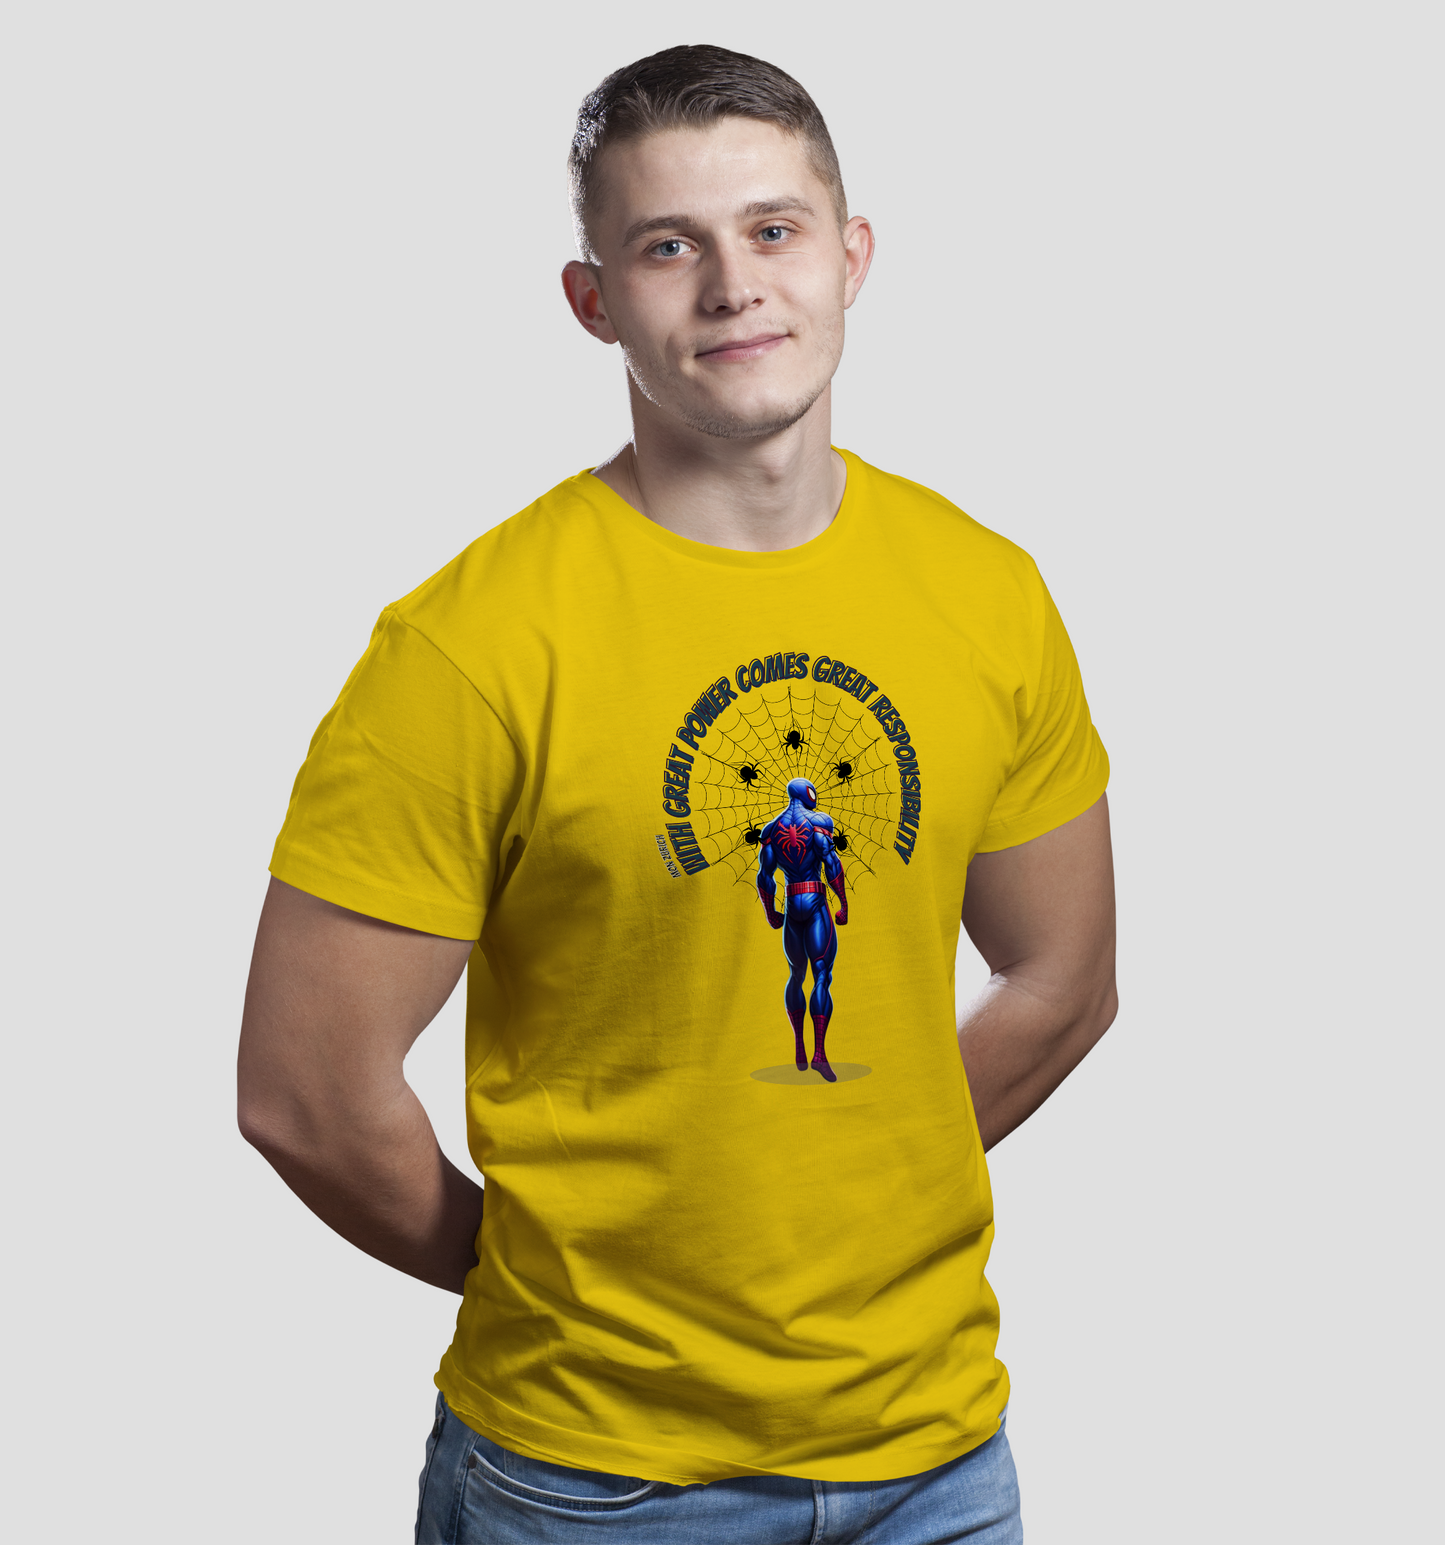 With Great Power Comes Great Responsibility T-Shirt In Light - Mon Zurich Originals